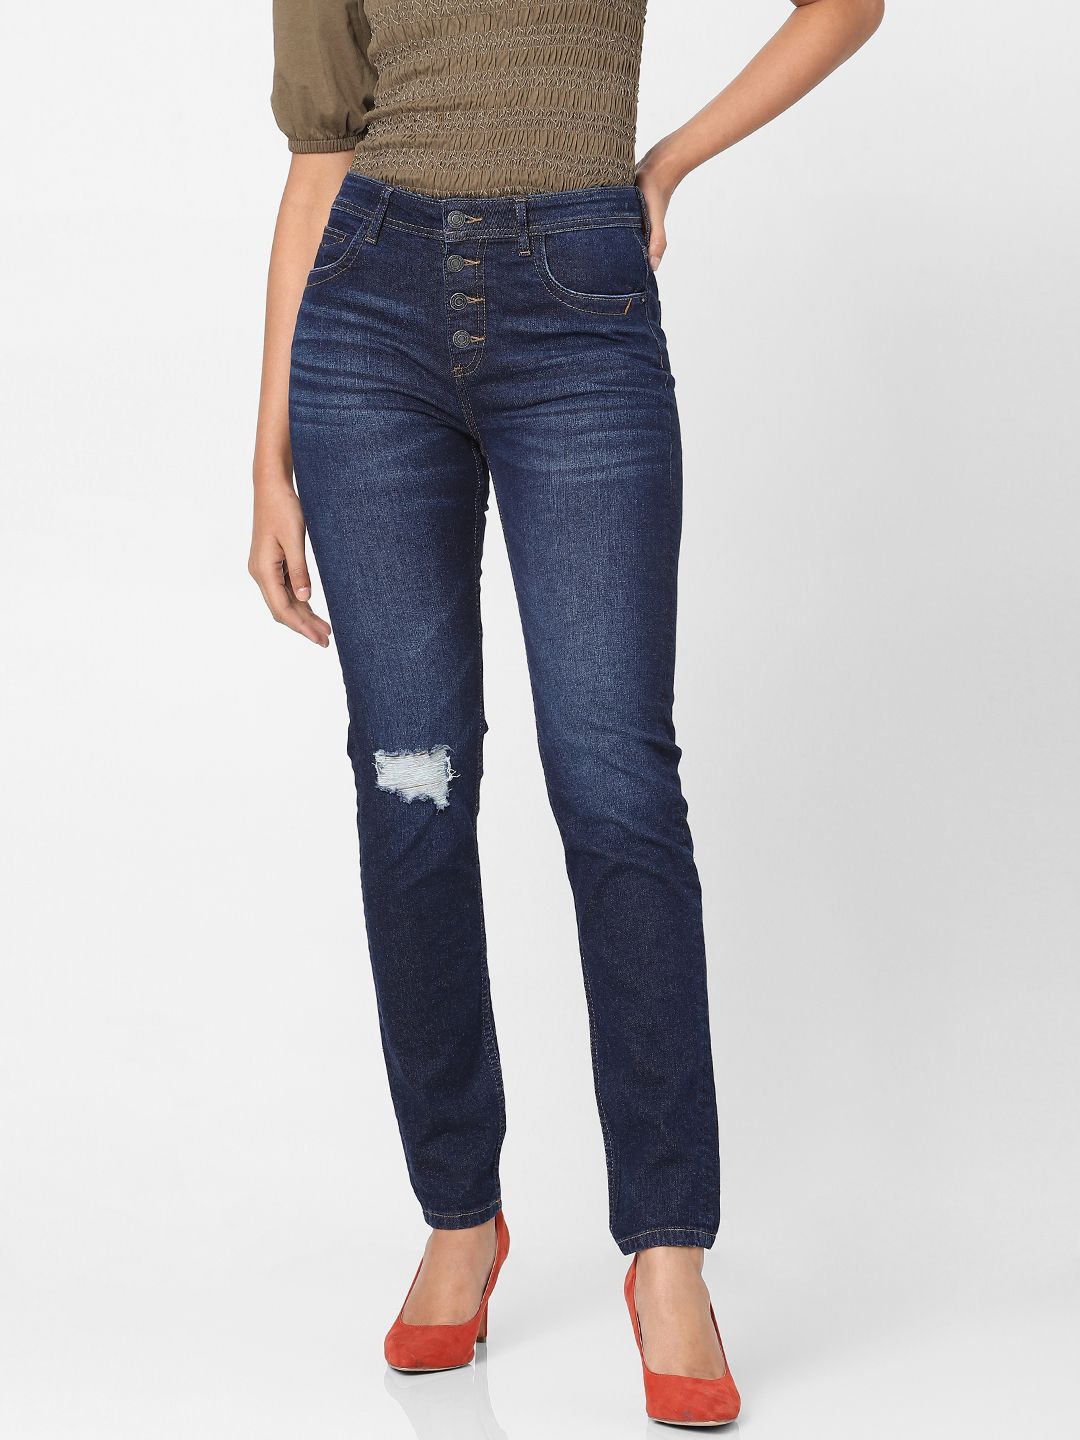 Vero Moda Women Blue Skinny Fit High-Rise Highly Distressed Light Fade Stretchable Jeans Price in India